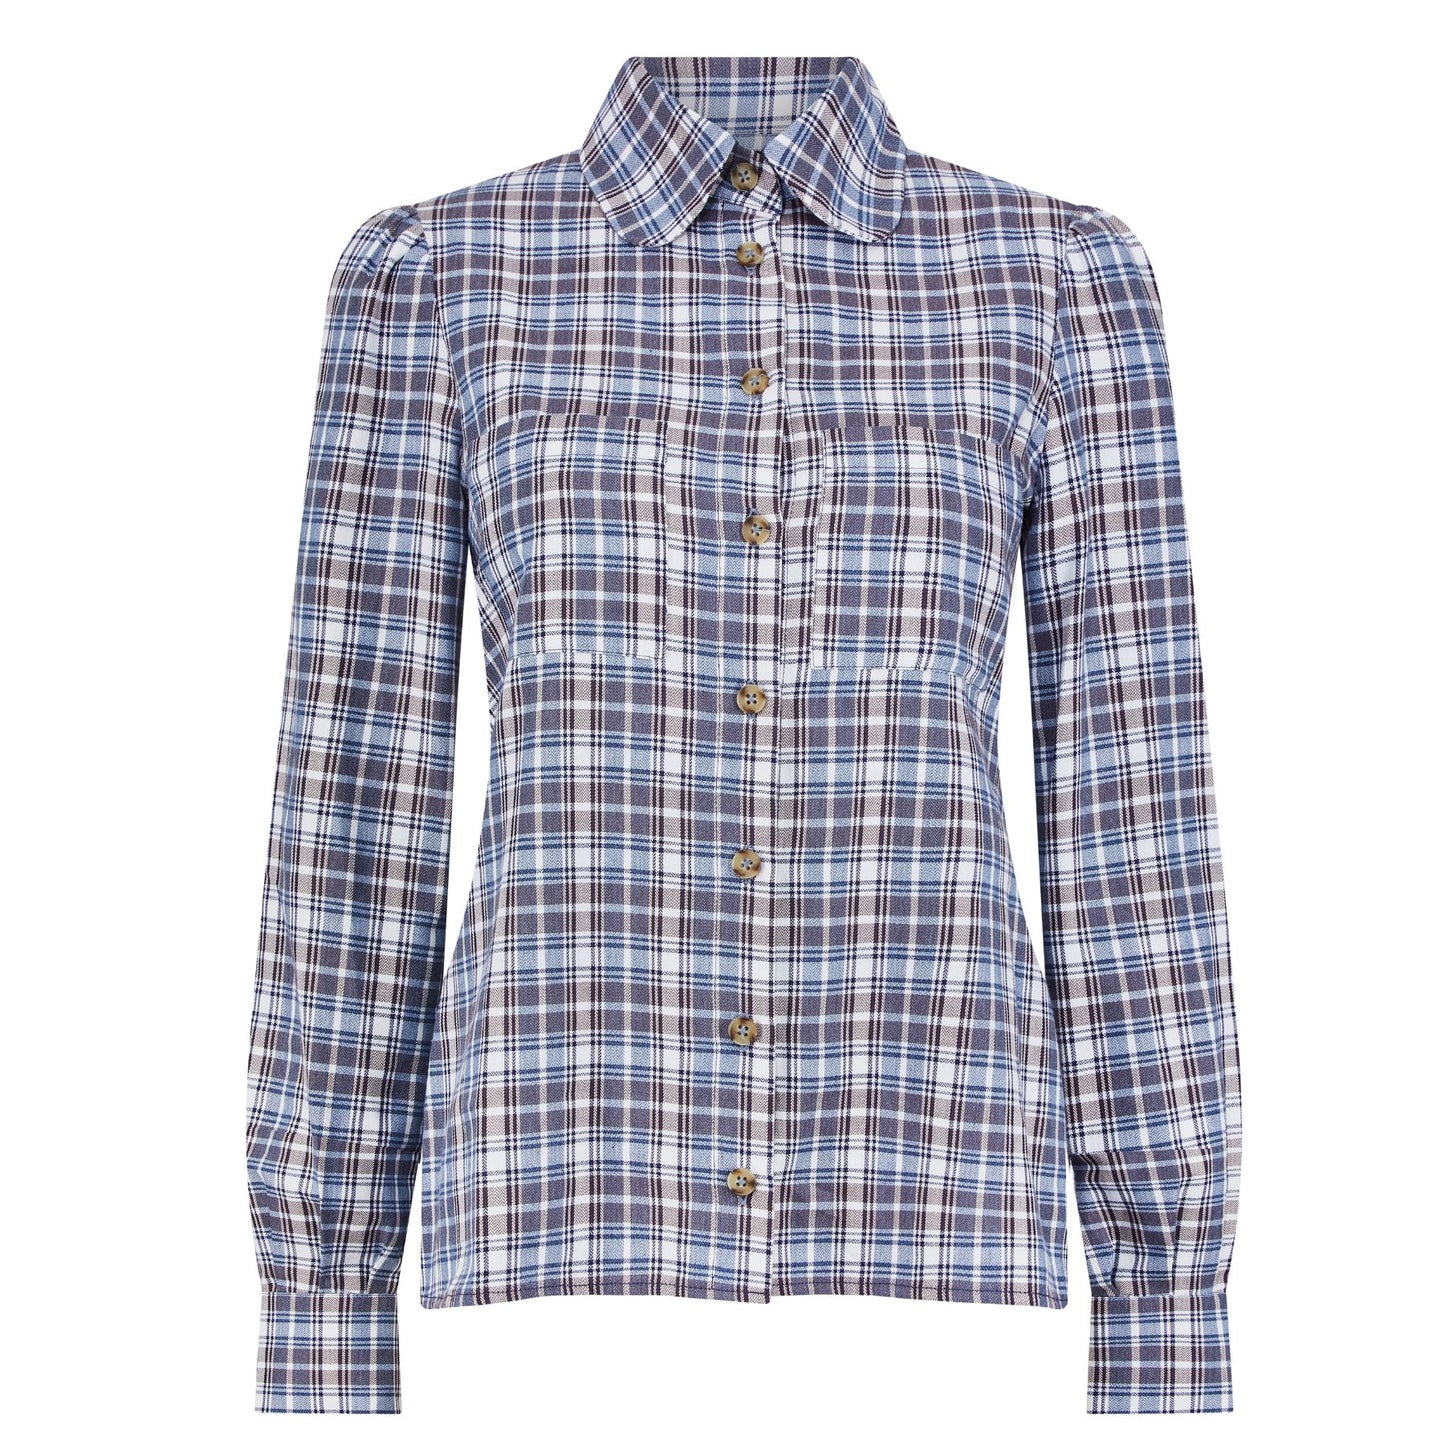 Round Collar Shirt in Blue Check